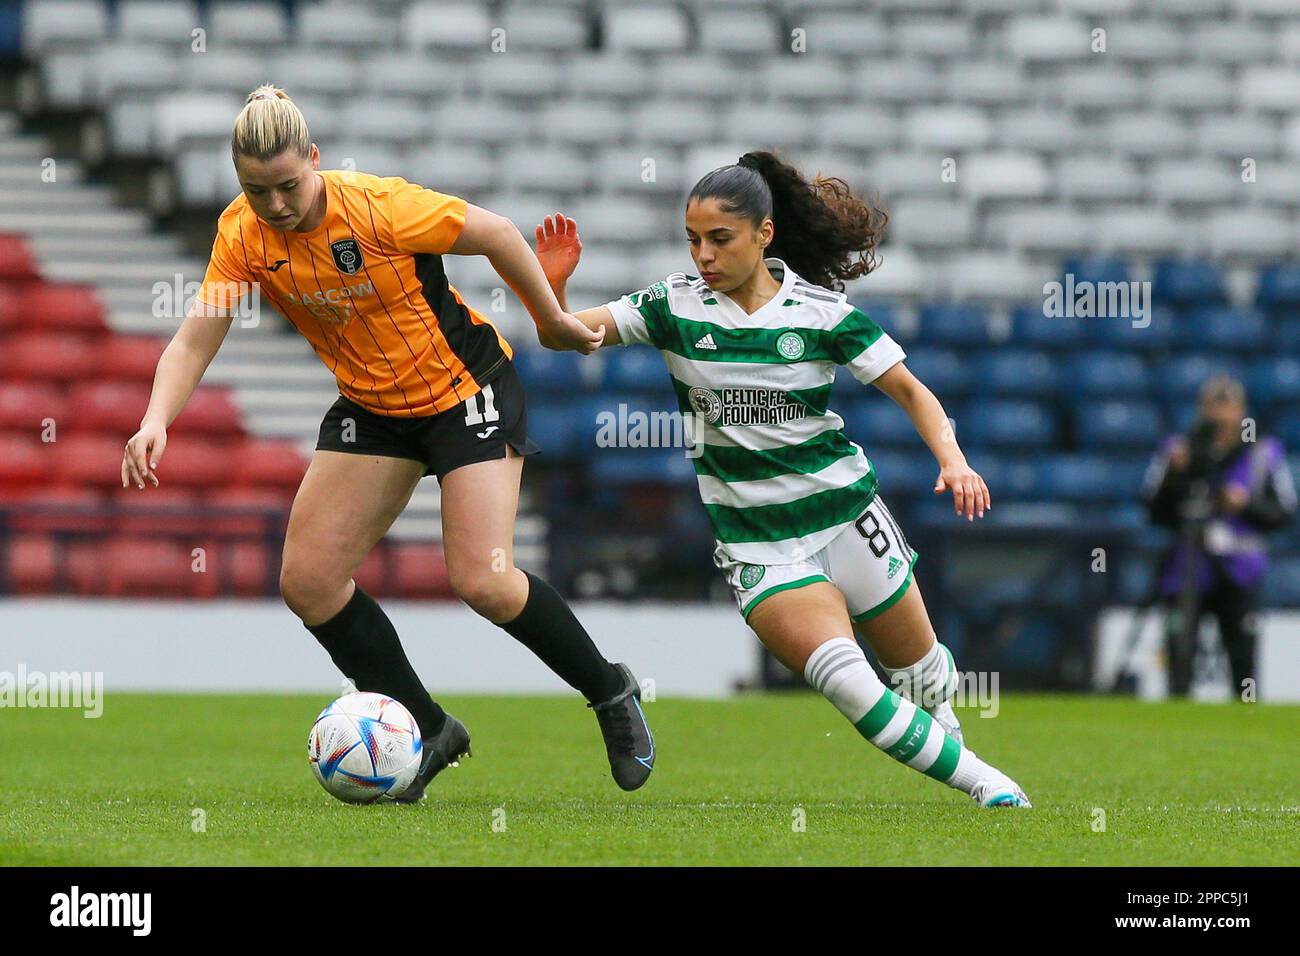 Glasgow, UK. 23rd Apr, 2023. In the semi-final of the Women's Scottish Cup between Glasgow City vs Celtic, played at Hampden Park, Glasgow, Scotland, UK, Celtic won by 0 - 1, with the goal scored by NATASHA FLINT, Celtic number 26, in 19 minutes. Celtic now go forward to play Rangers in the final on 28 May 2023 at Hampden Park, Glasgow, Scotland Credit: Findlay/Alamy Live News Stock Photo